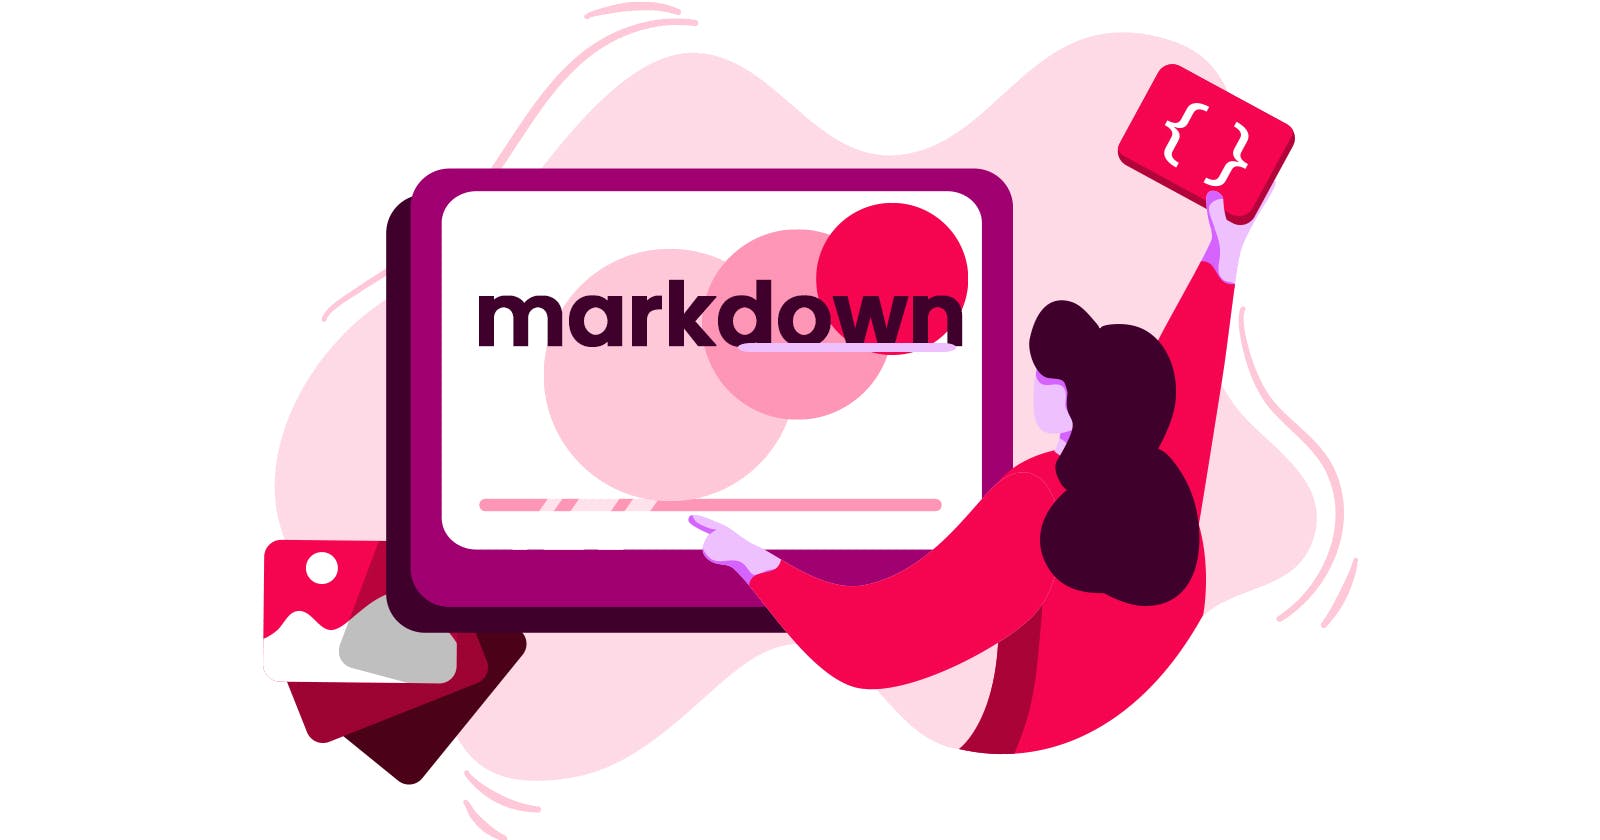 A quick note about markdown.md